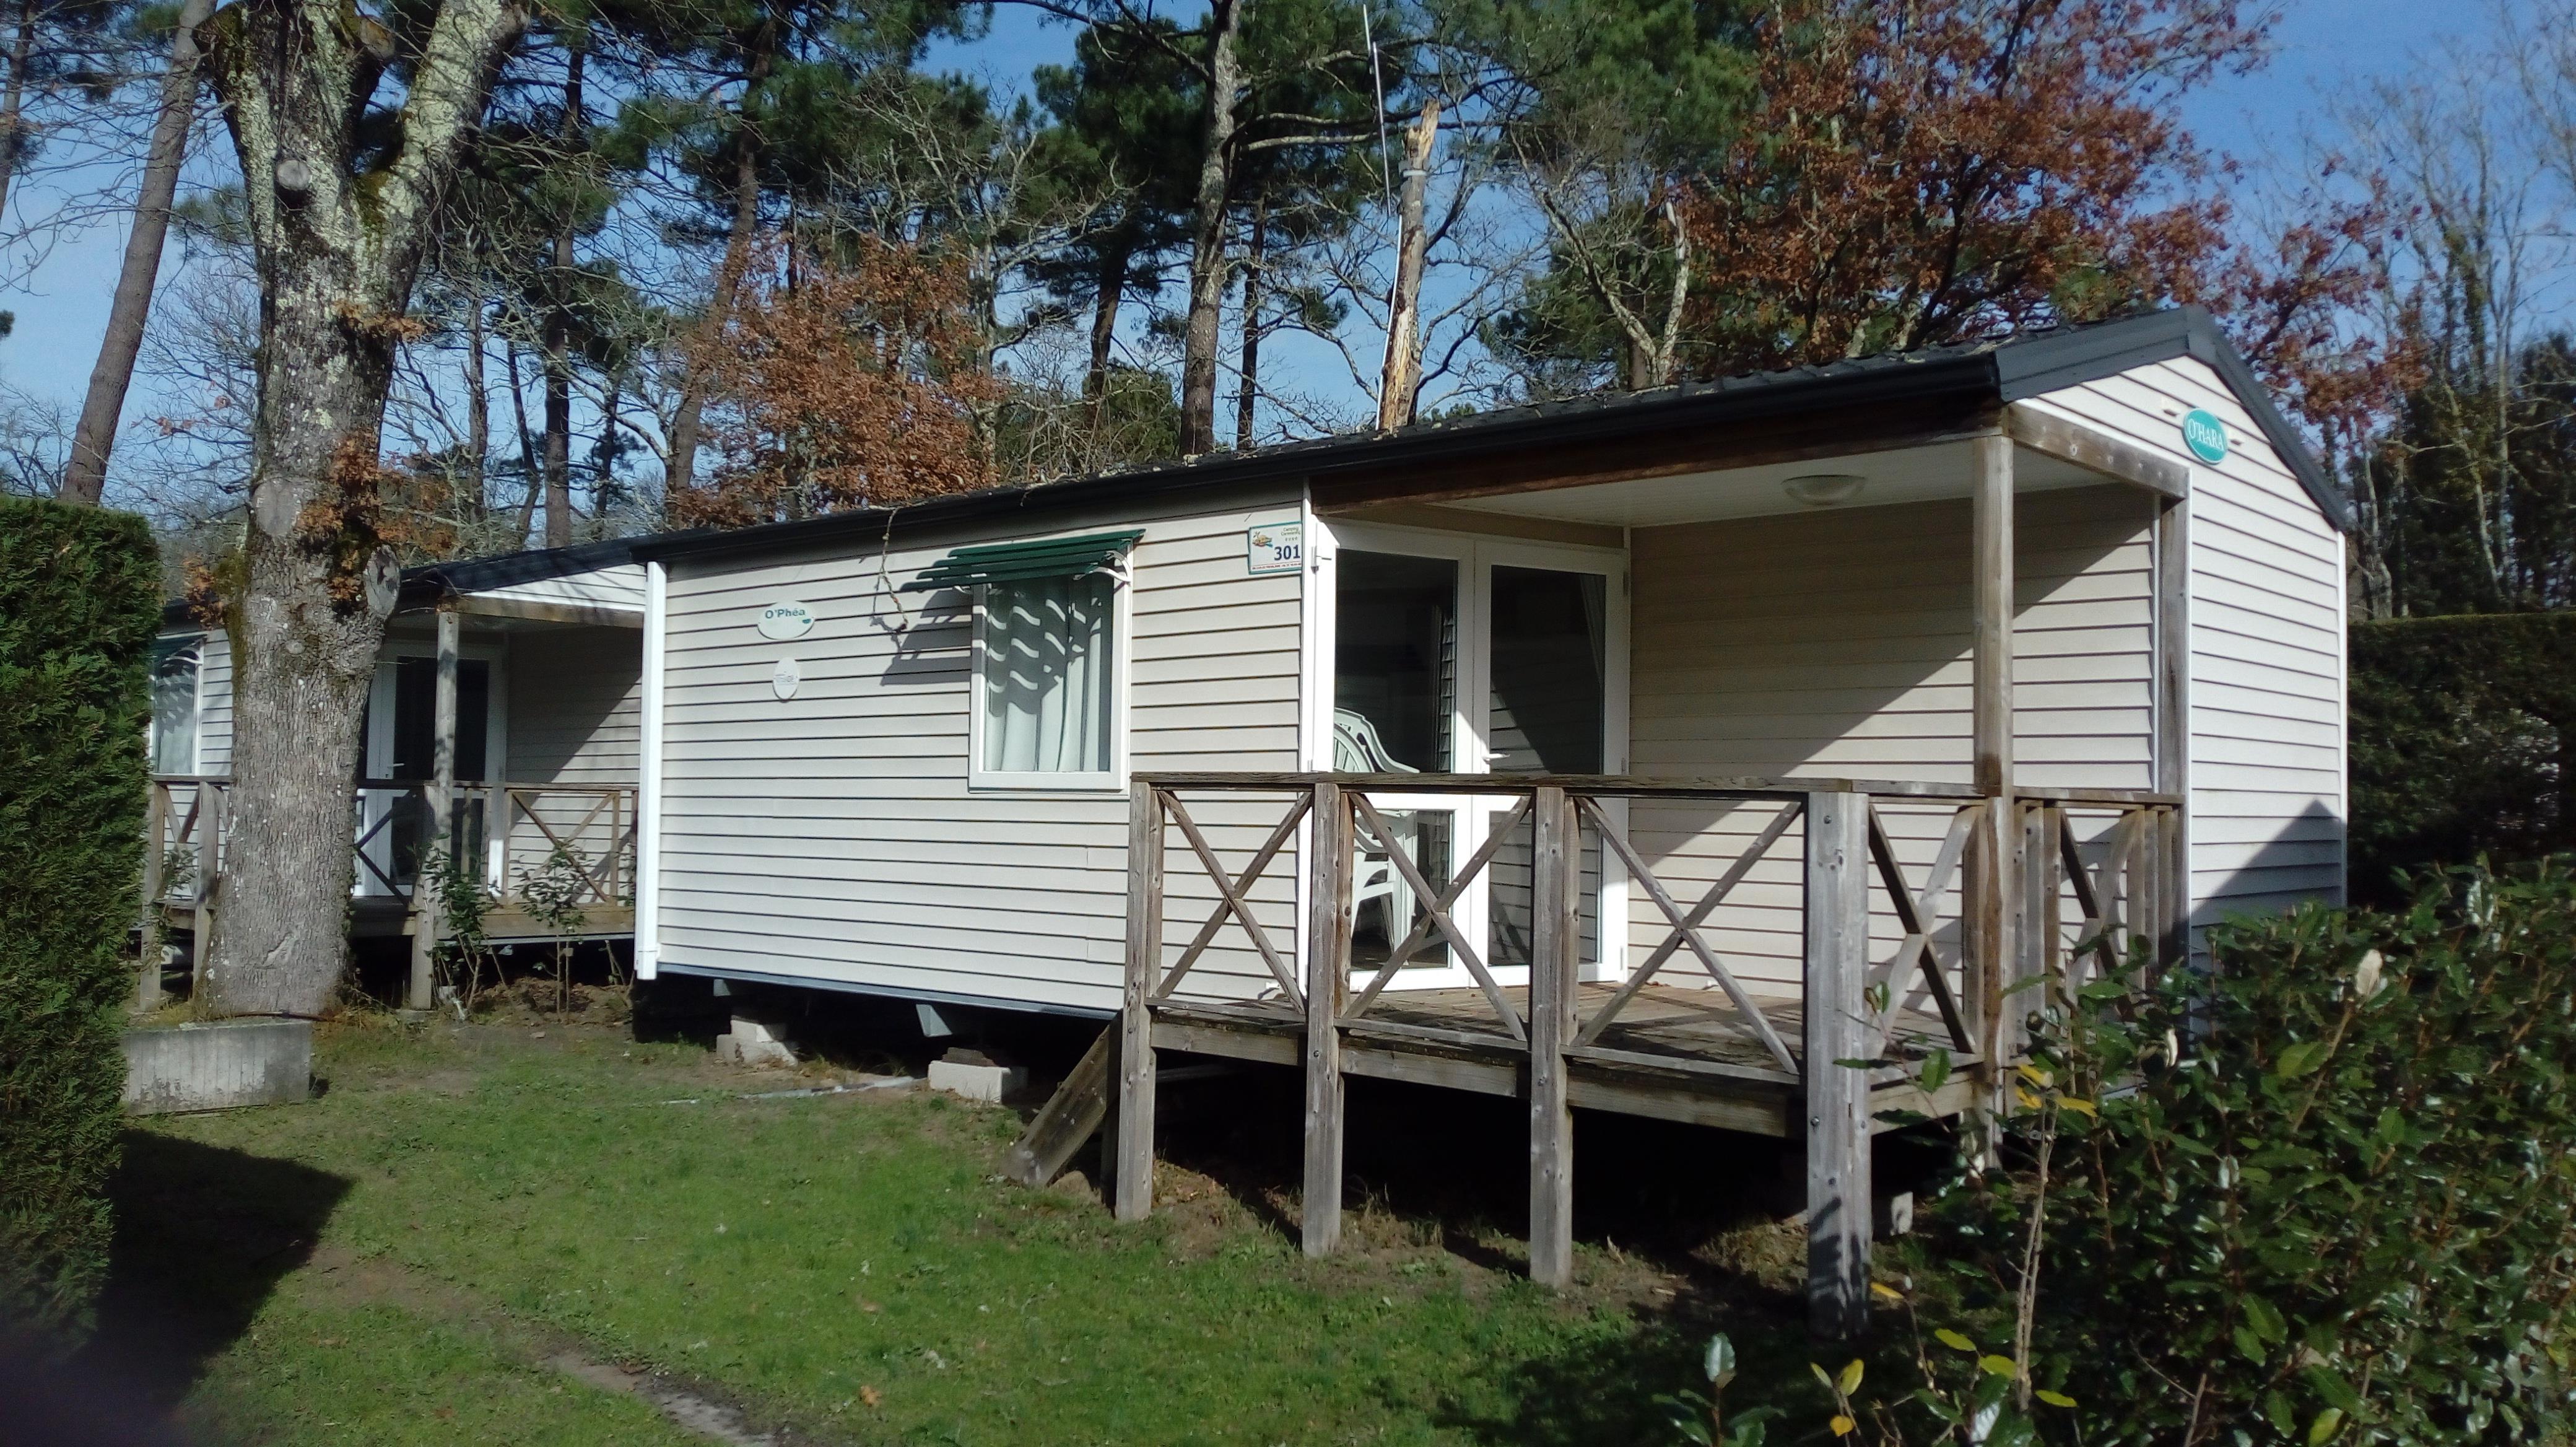 Accommodation - Mobilhome 2 Bedrooms / Half-Covered Terrace - YELLOH! VILLAGE - CAMPING LA CLAIRIERE